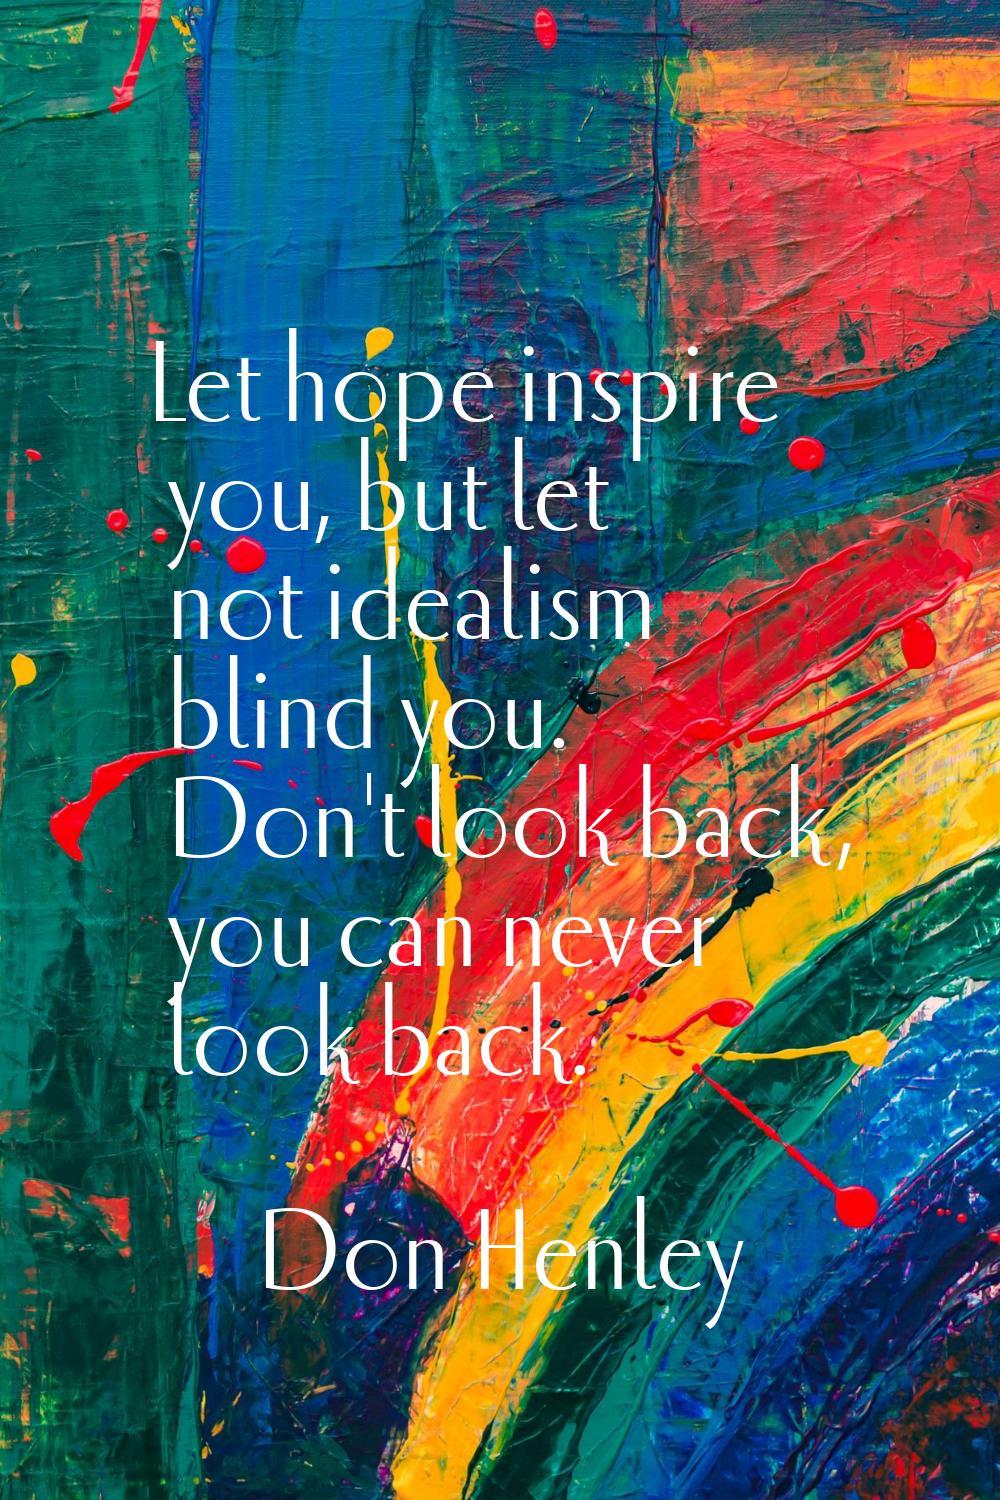 Let hope inspire you, but let not idealism blind you. Don't look back, you can never look back.